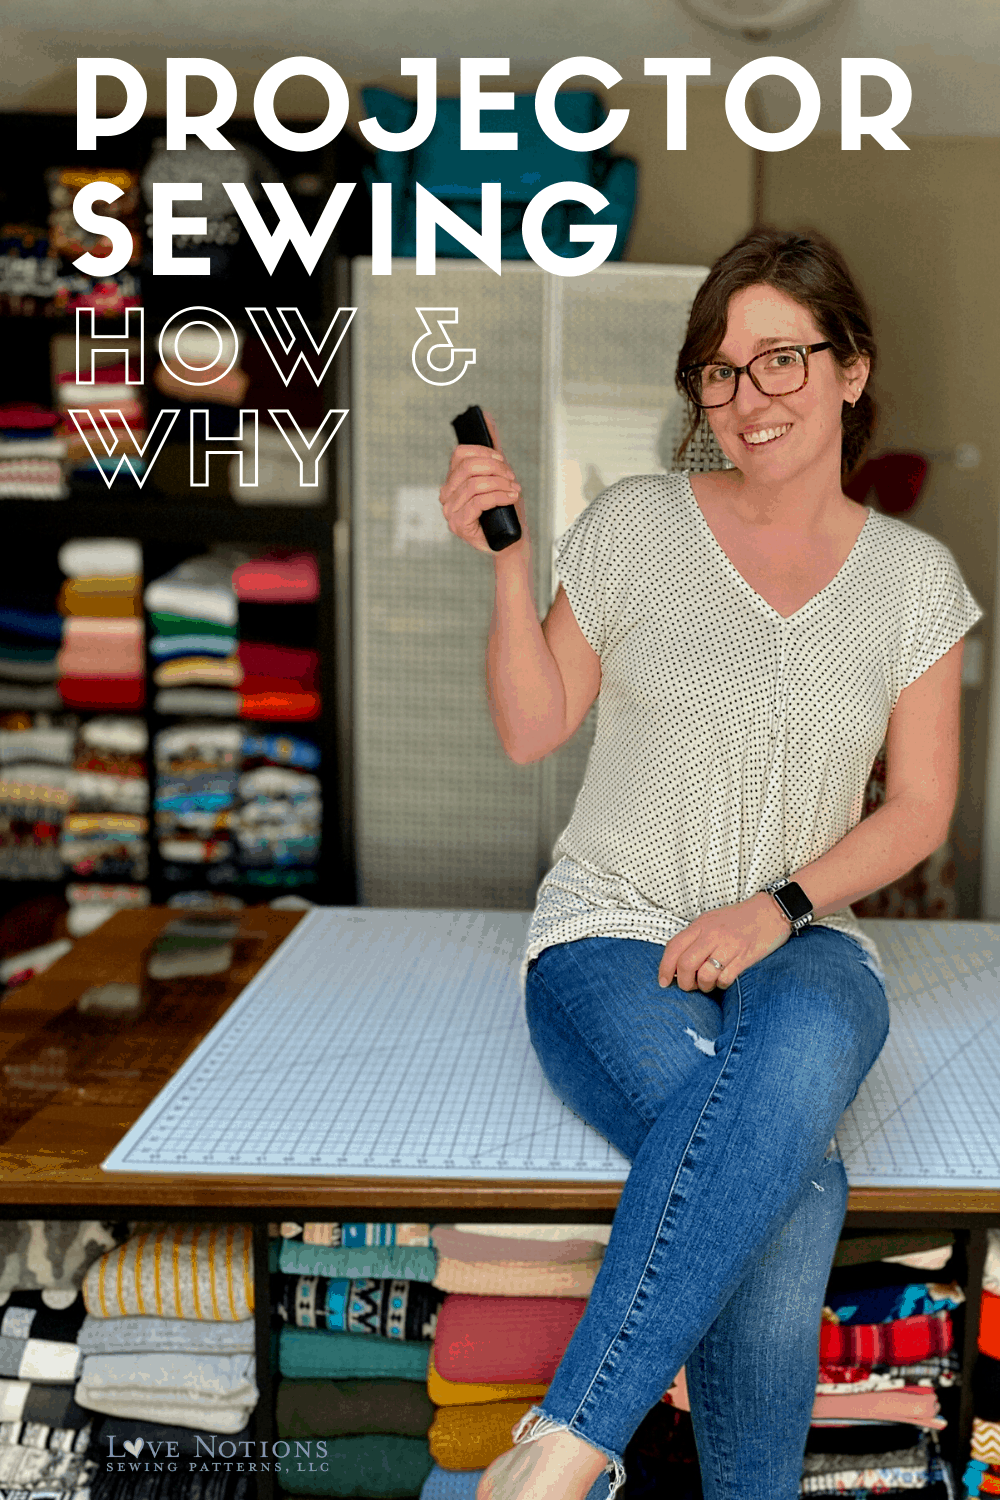 How to use a Projector to Revolutionize your Sewing - Love Notions